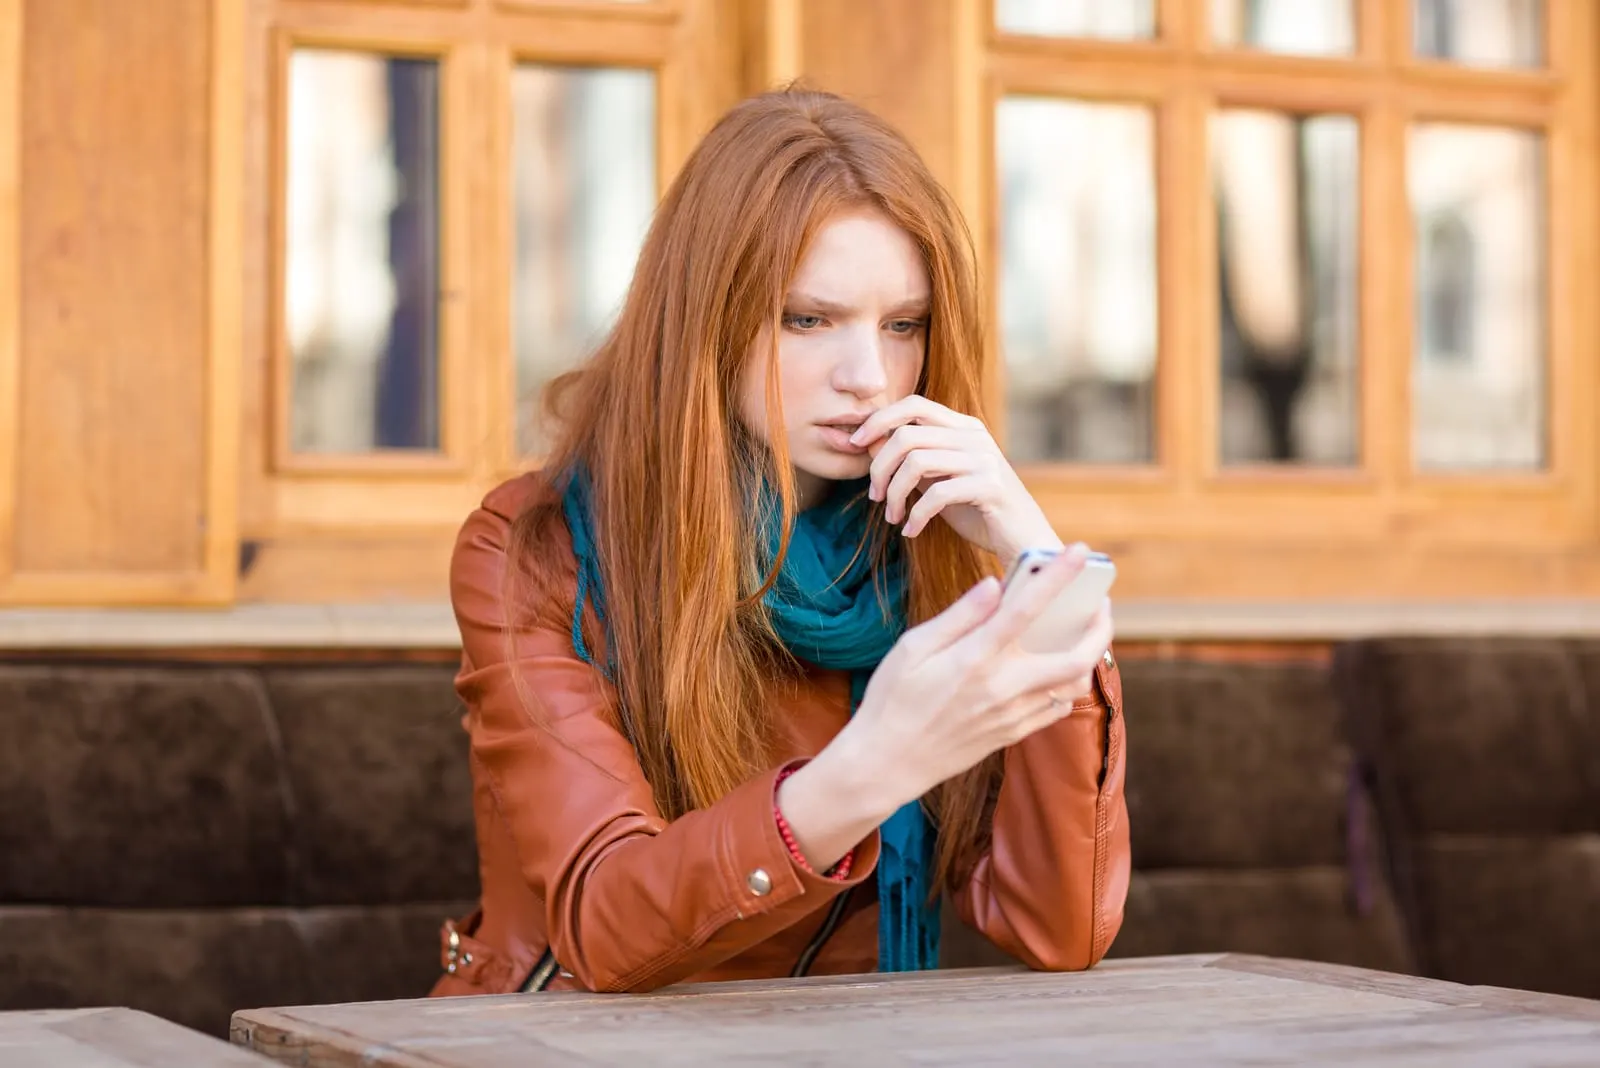 a woman with long red hair is sitting at a table with a phone in her hand